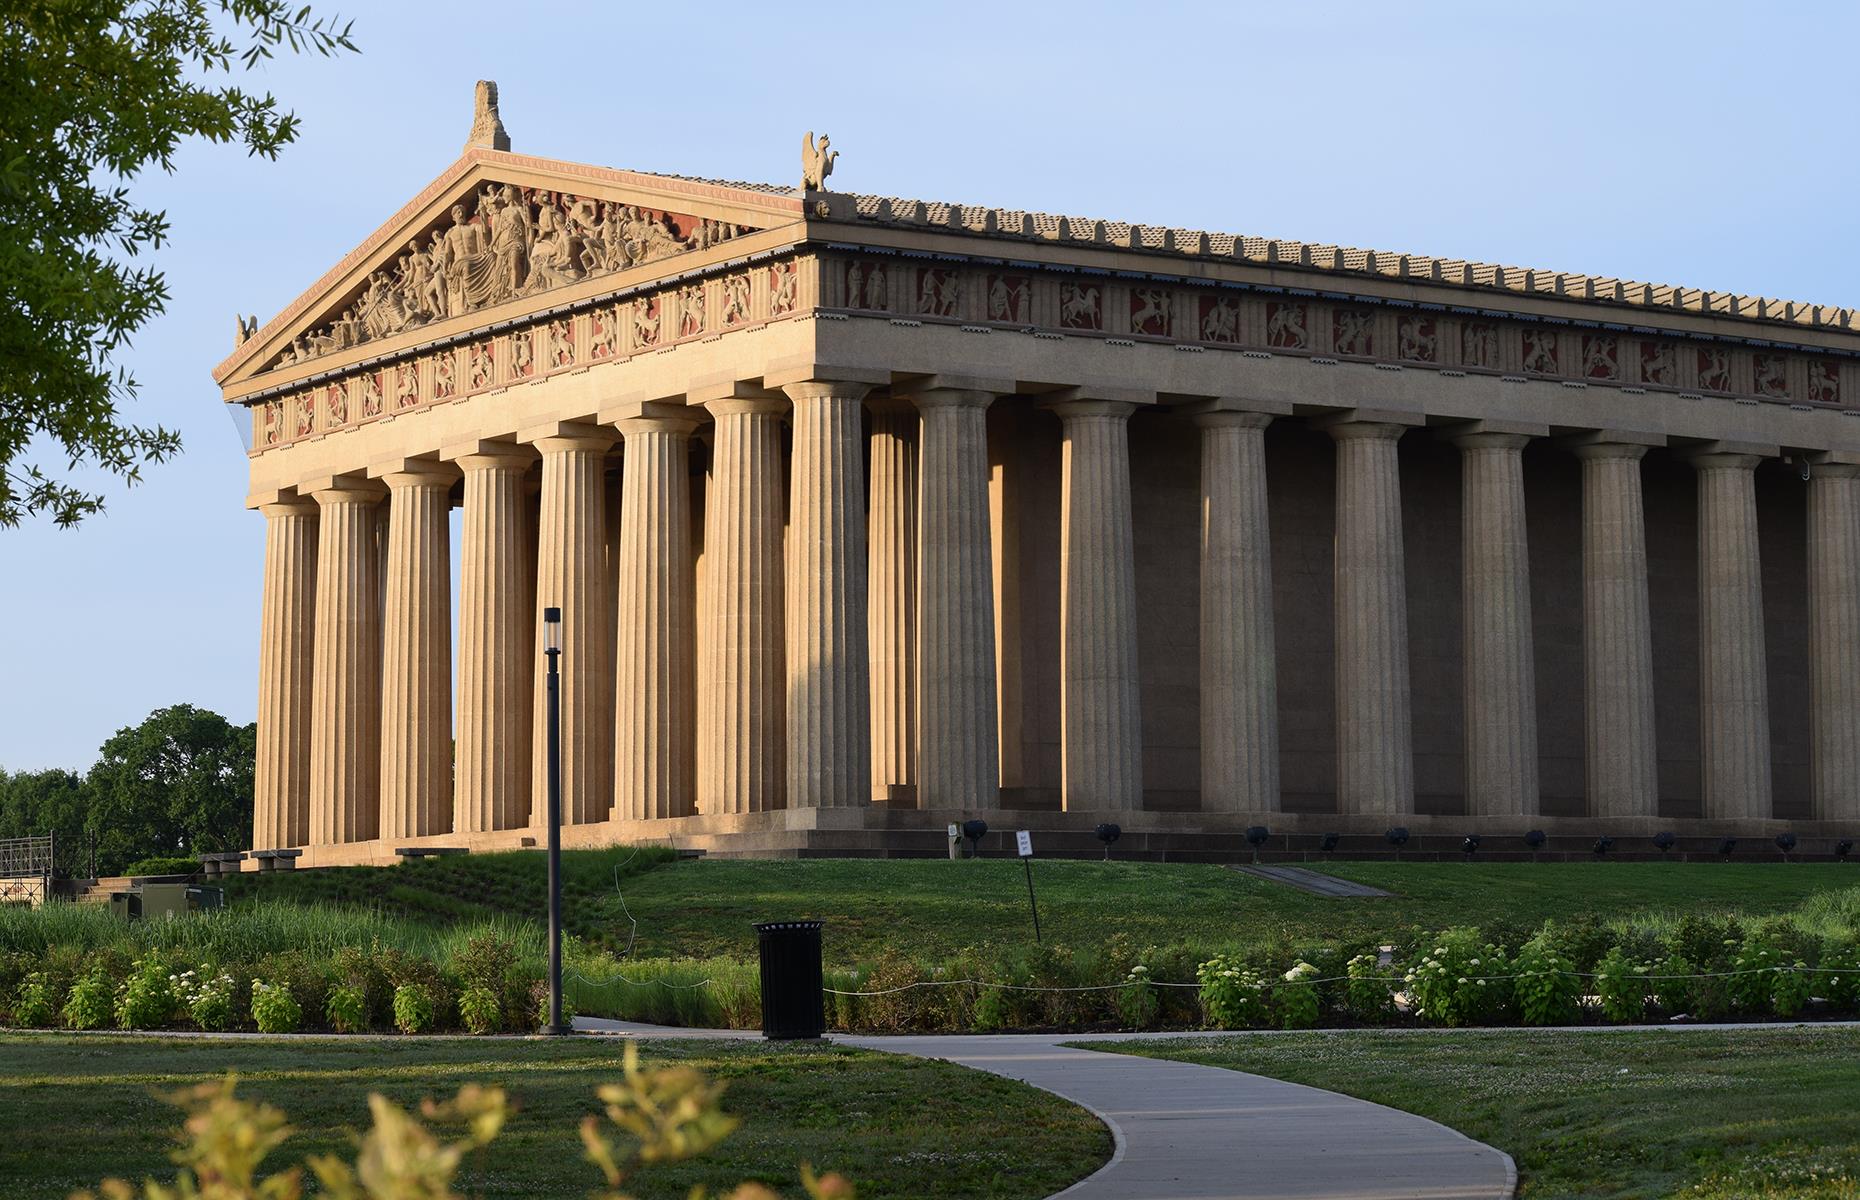 You might be puzzled as to why a full-sized replica of the Parthenon sits in Nashville's Centennial Park. The answer is simple. The copycat attraction was constructed in the late 19th century to mark Tennessee's International Exposition in 1897. It became such a popular attraction that the state decided to make it permanent and today it's an art gallery, complete with a giant golden statue of the goddess Athena.